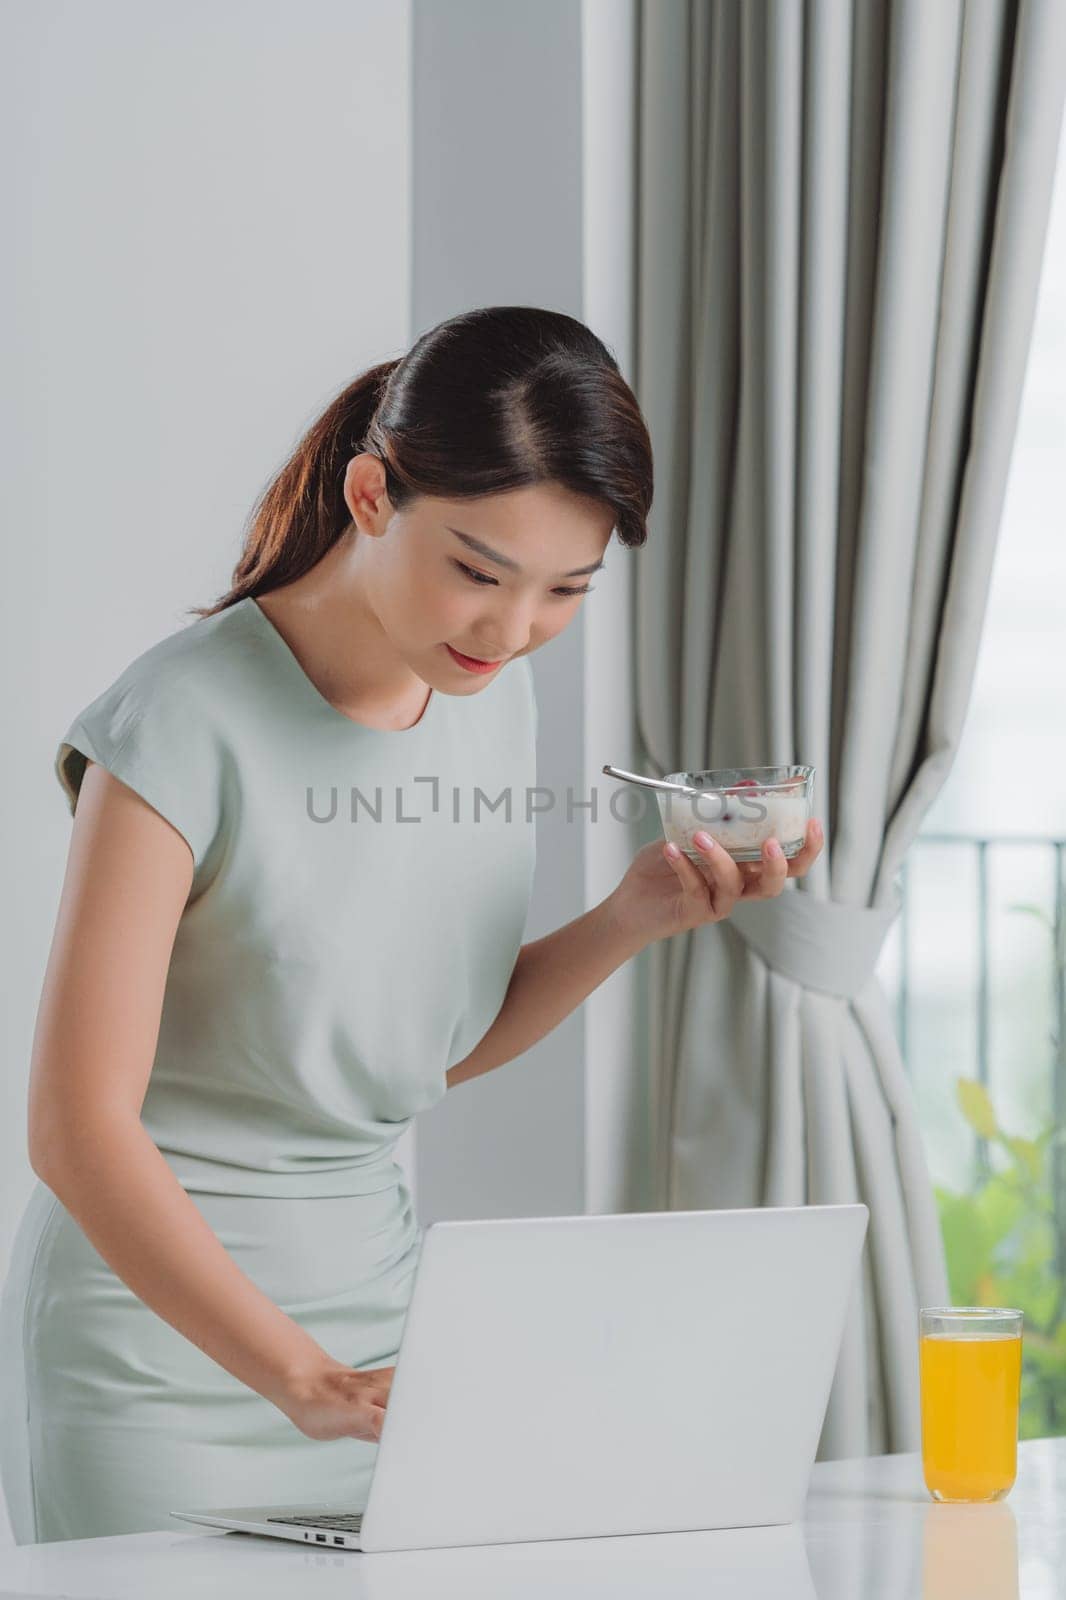 Satisfied woman eating breakfast using a laptop on a desk at home